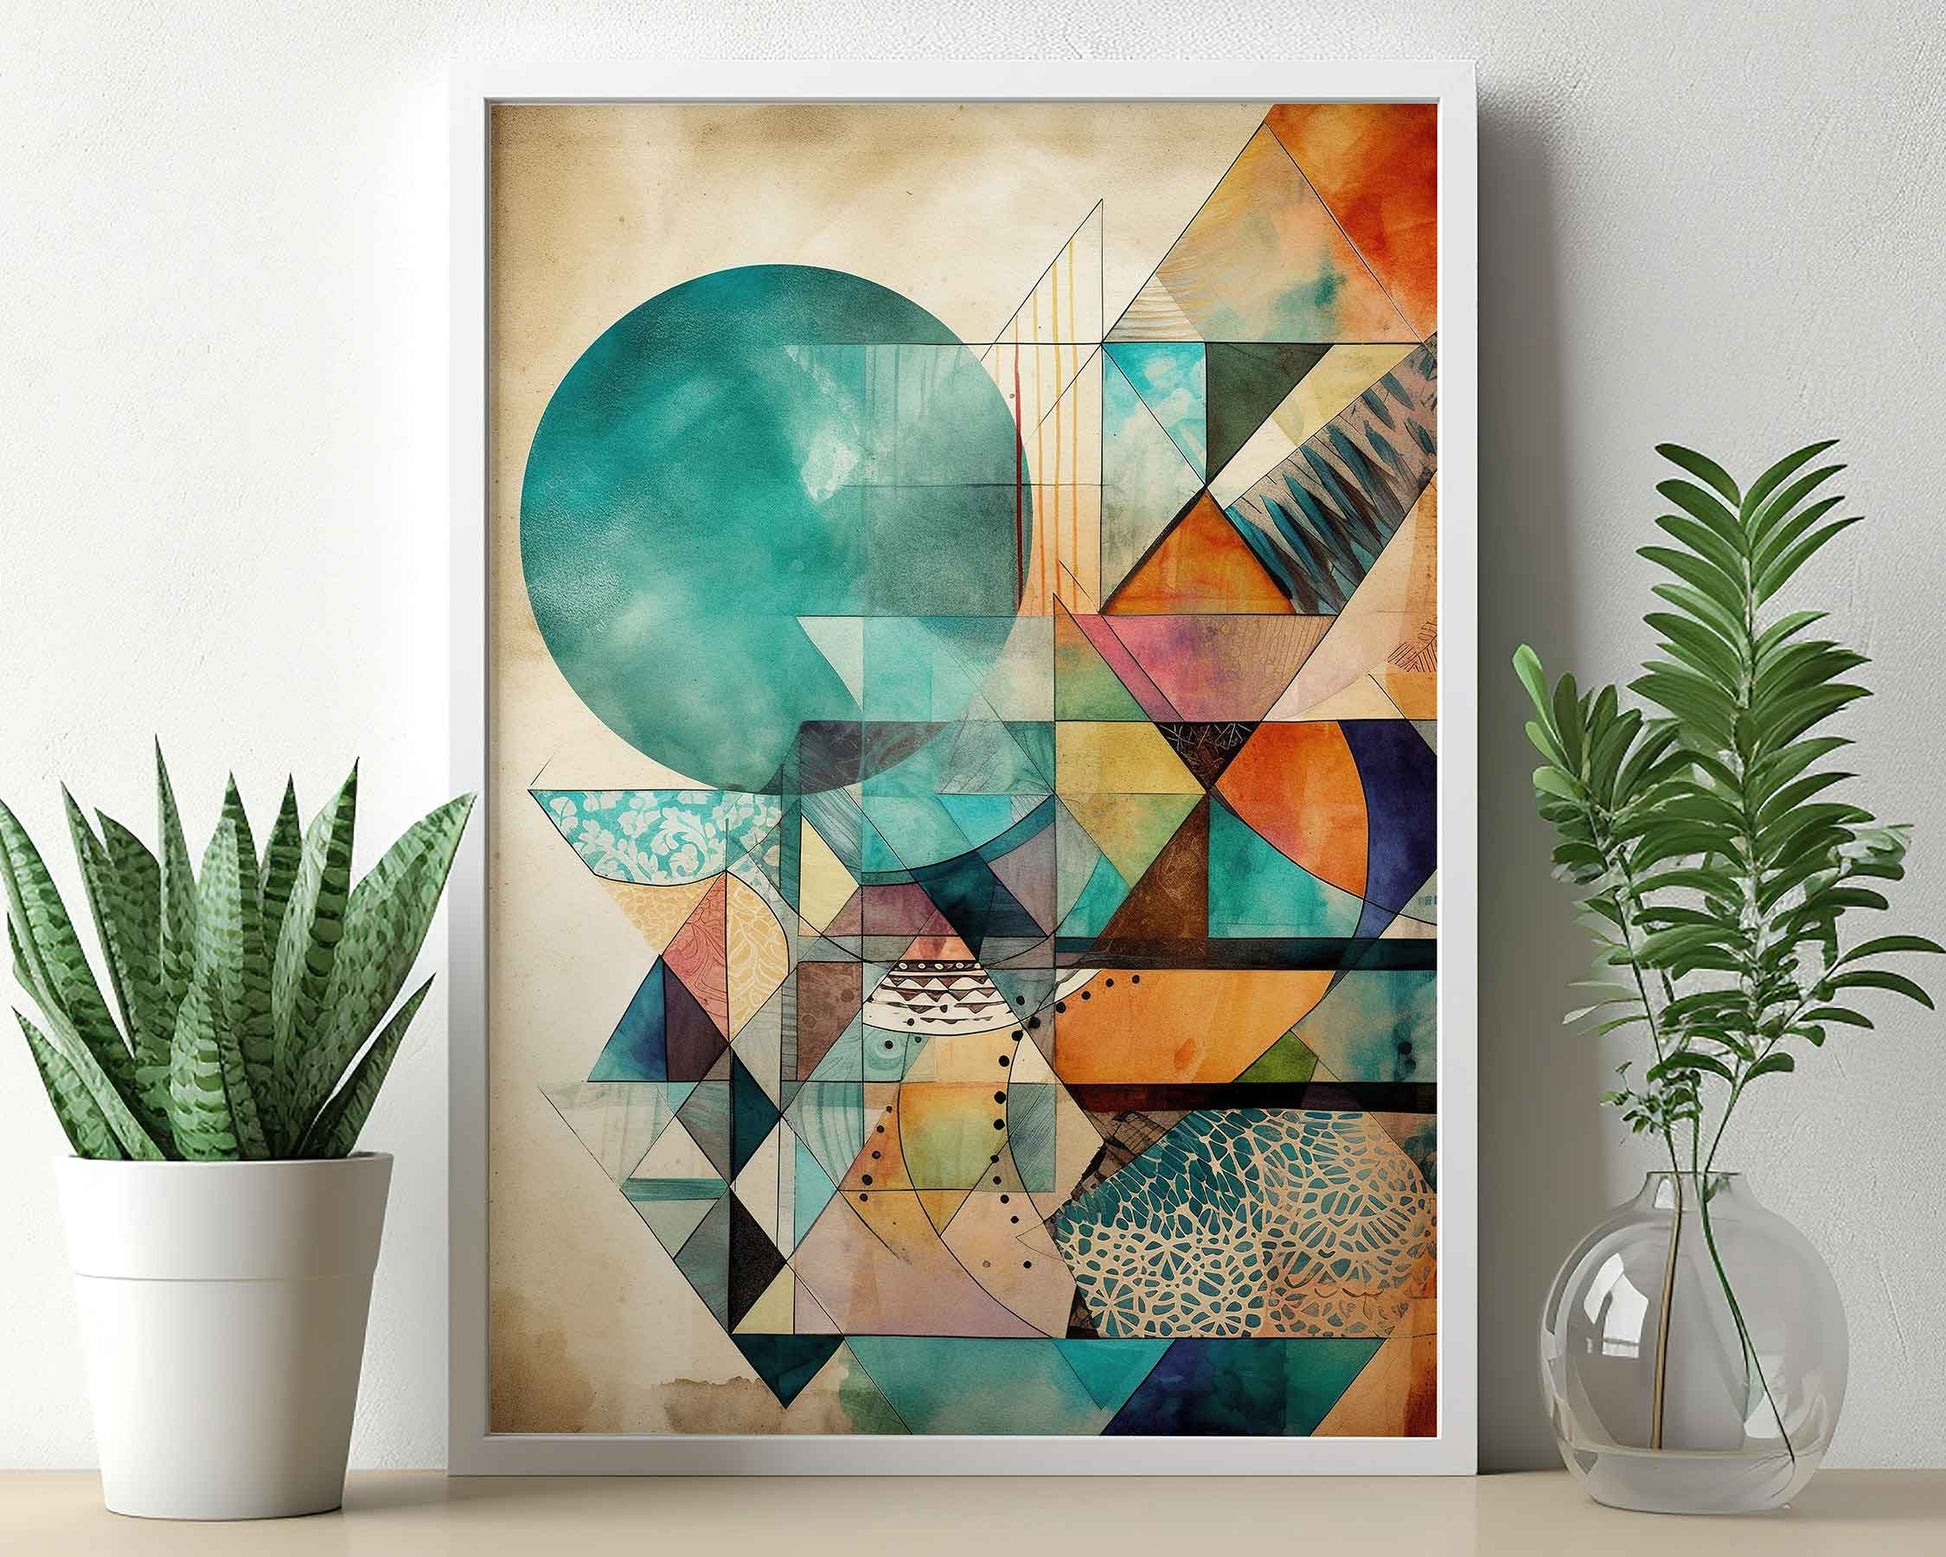 Framed Image of Boho Aztec Abstract Geometric Tribal Style Wall Art Poster Prints